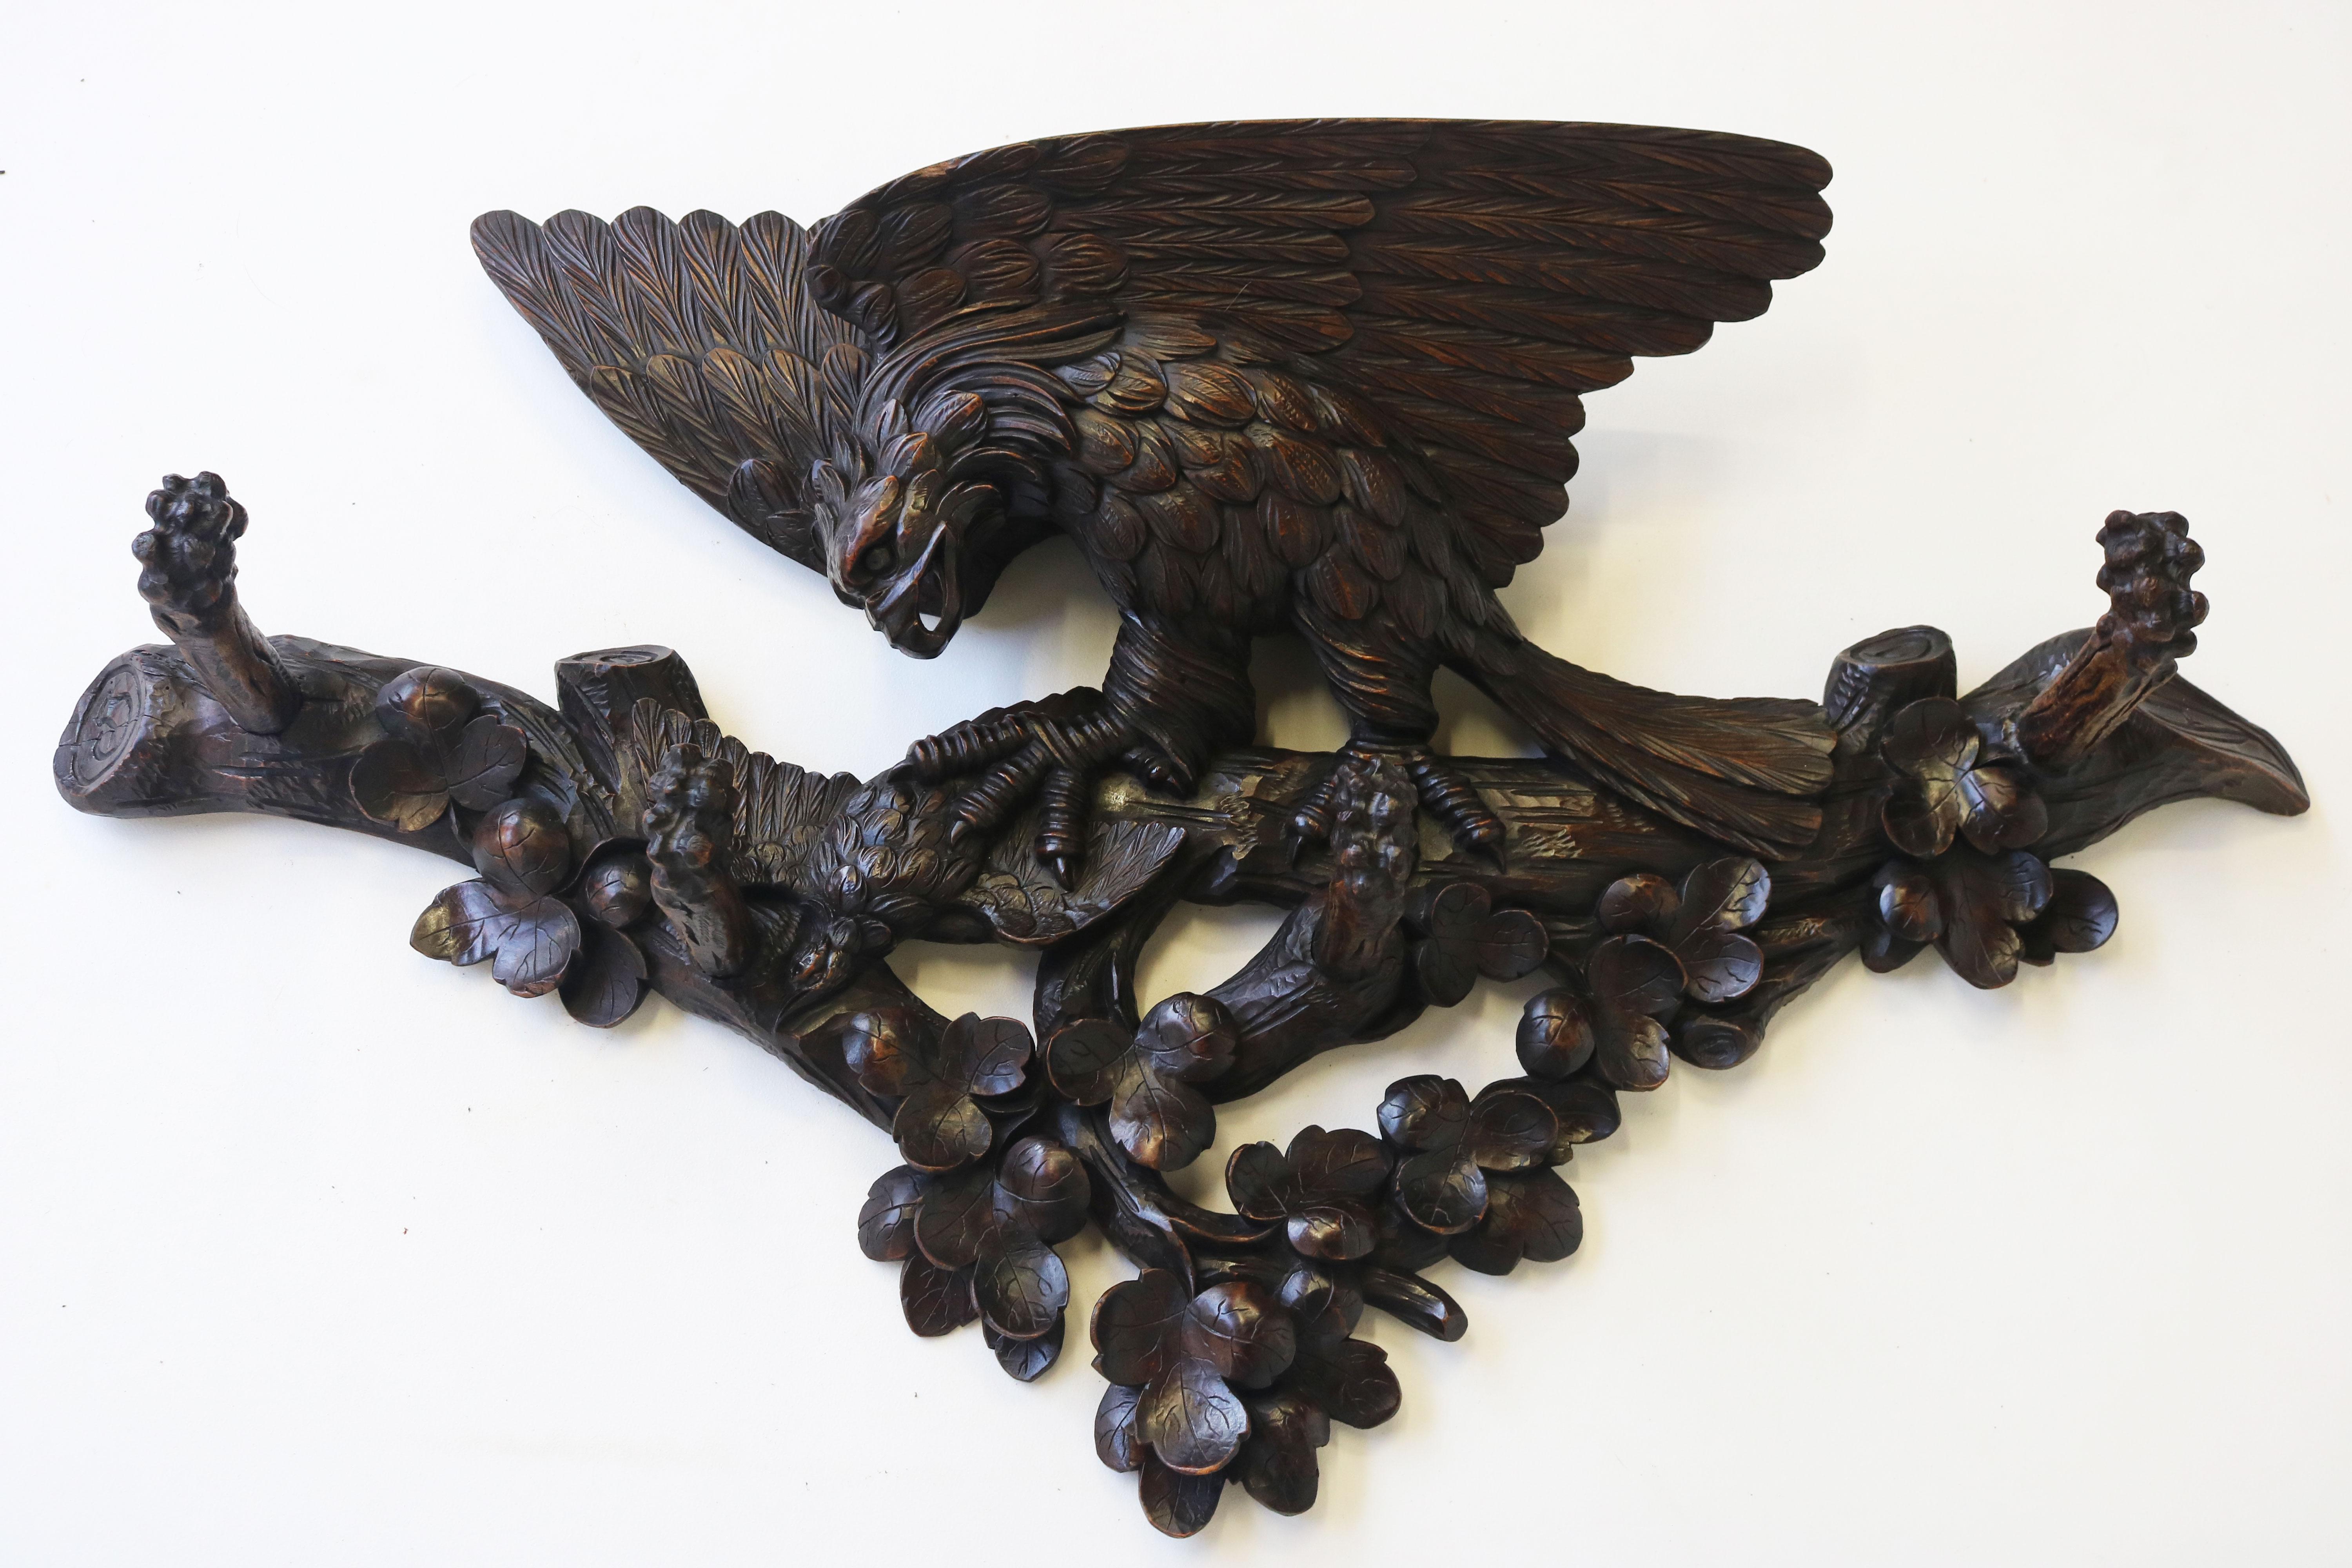 Exquisite 19th century Swiss Black Forest Coat rack carved eagle hallway antique For Sale 4